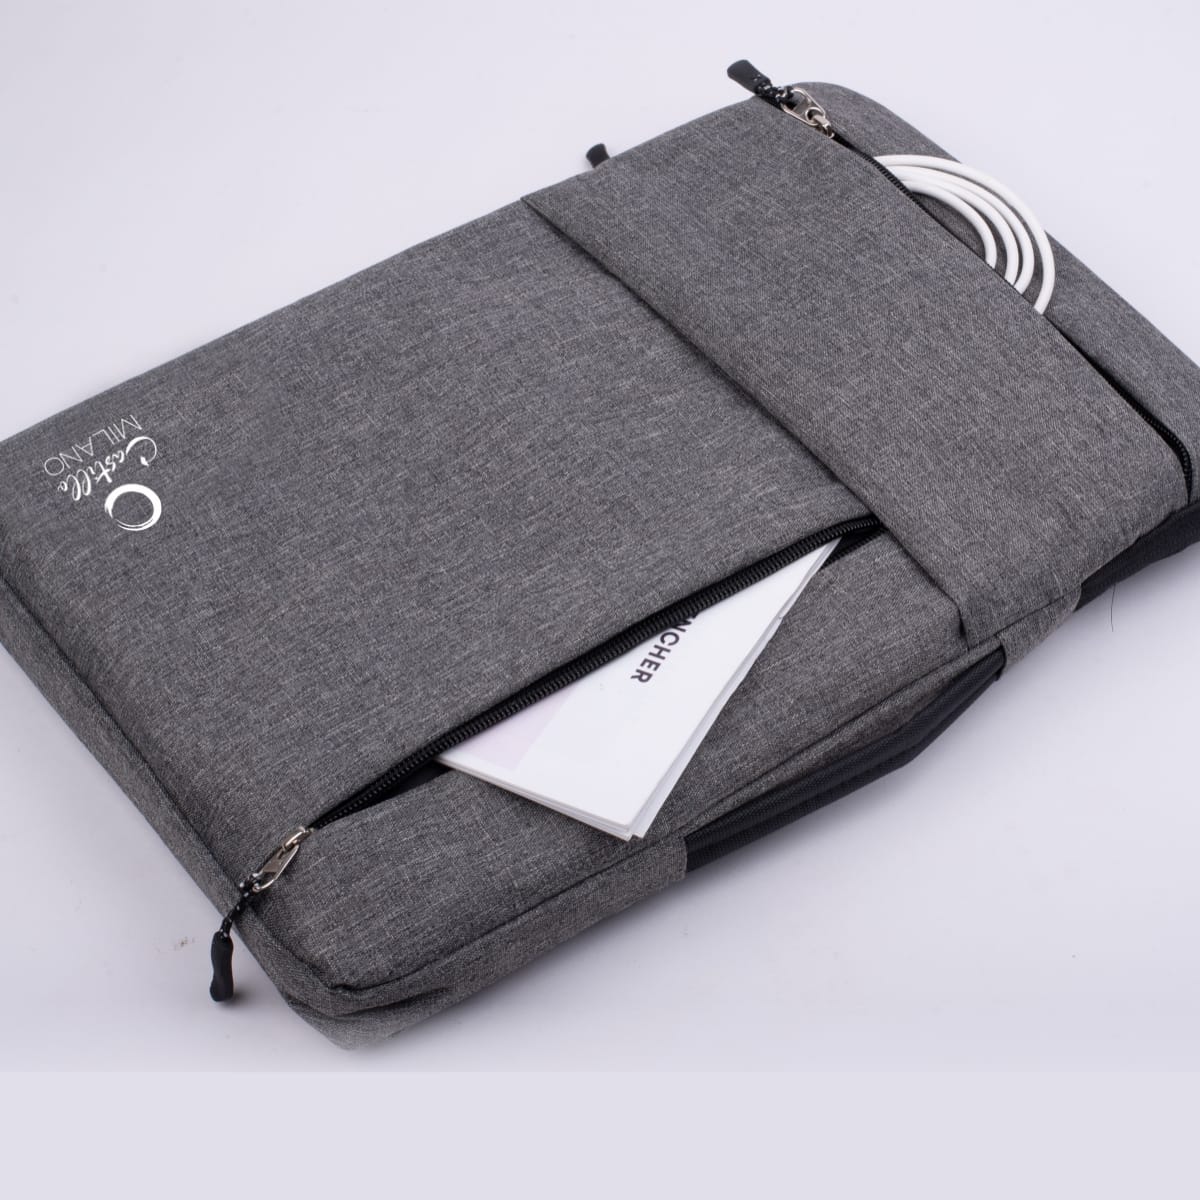 Gray Laptop Sleeve - For Employees, Travelers, Corporate, Client or Dealer Gifting, Events Promotional Freebies BGS36